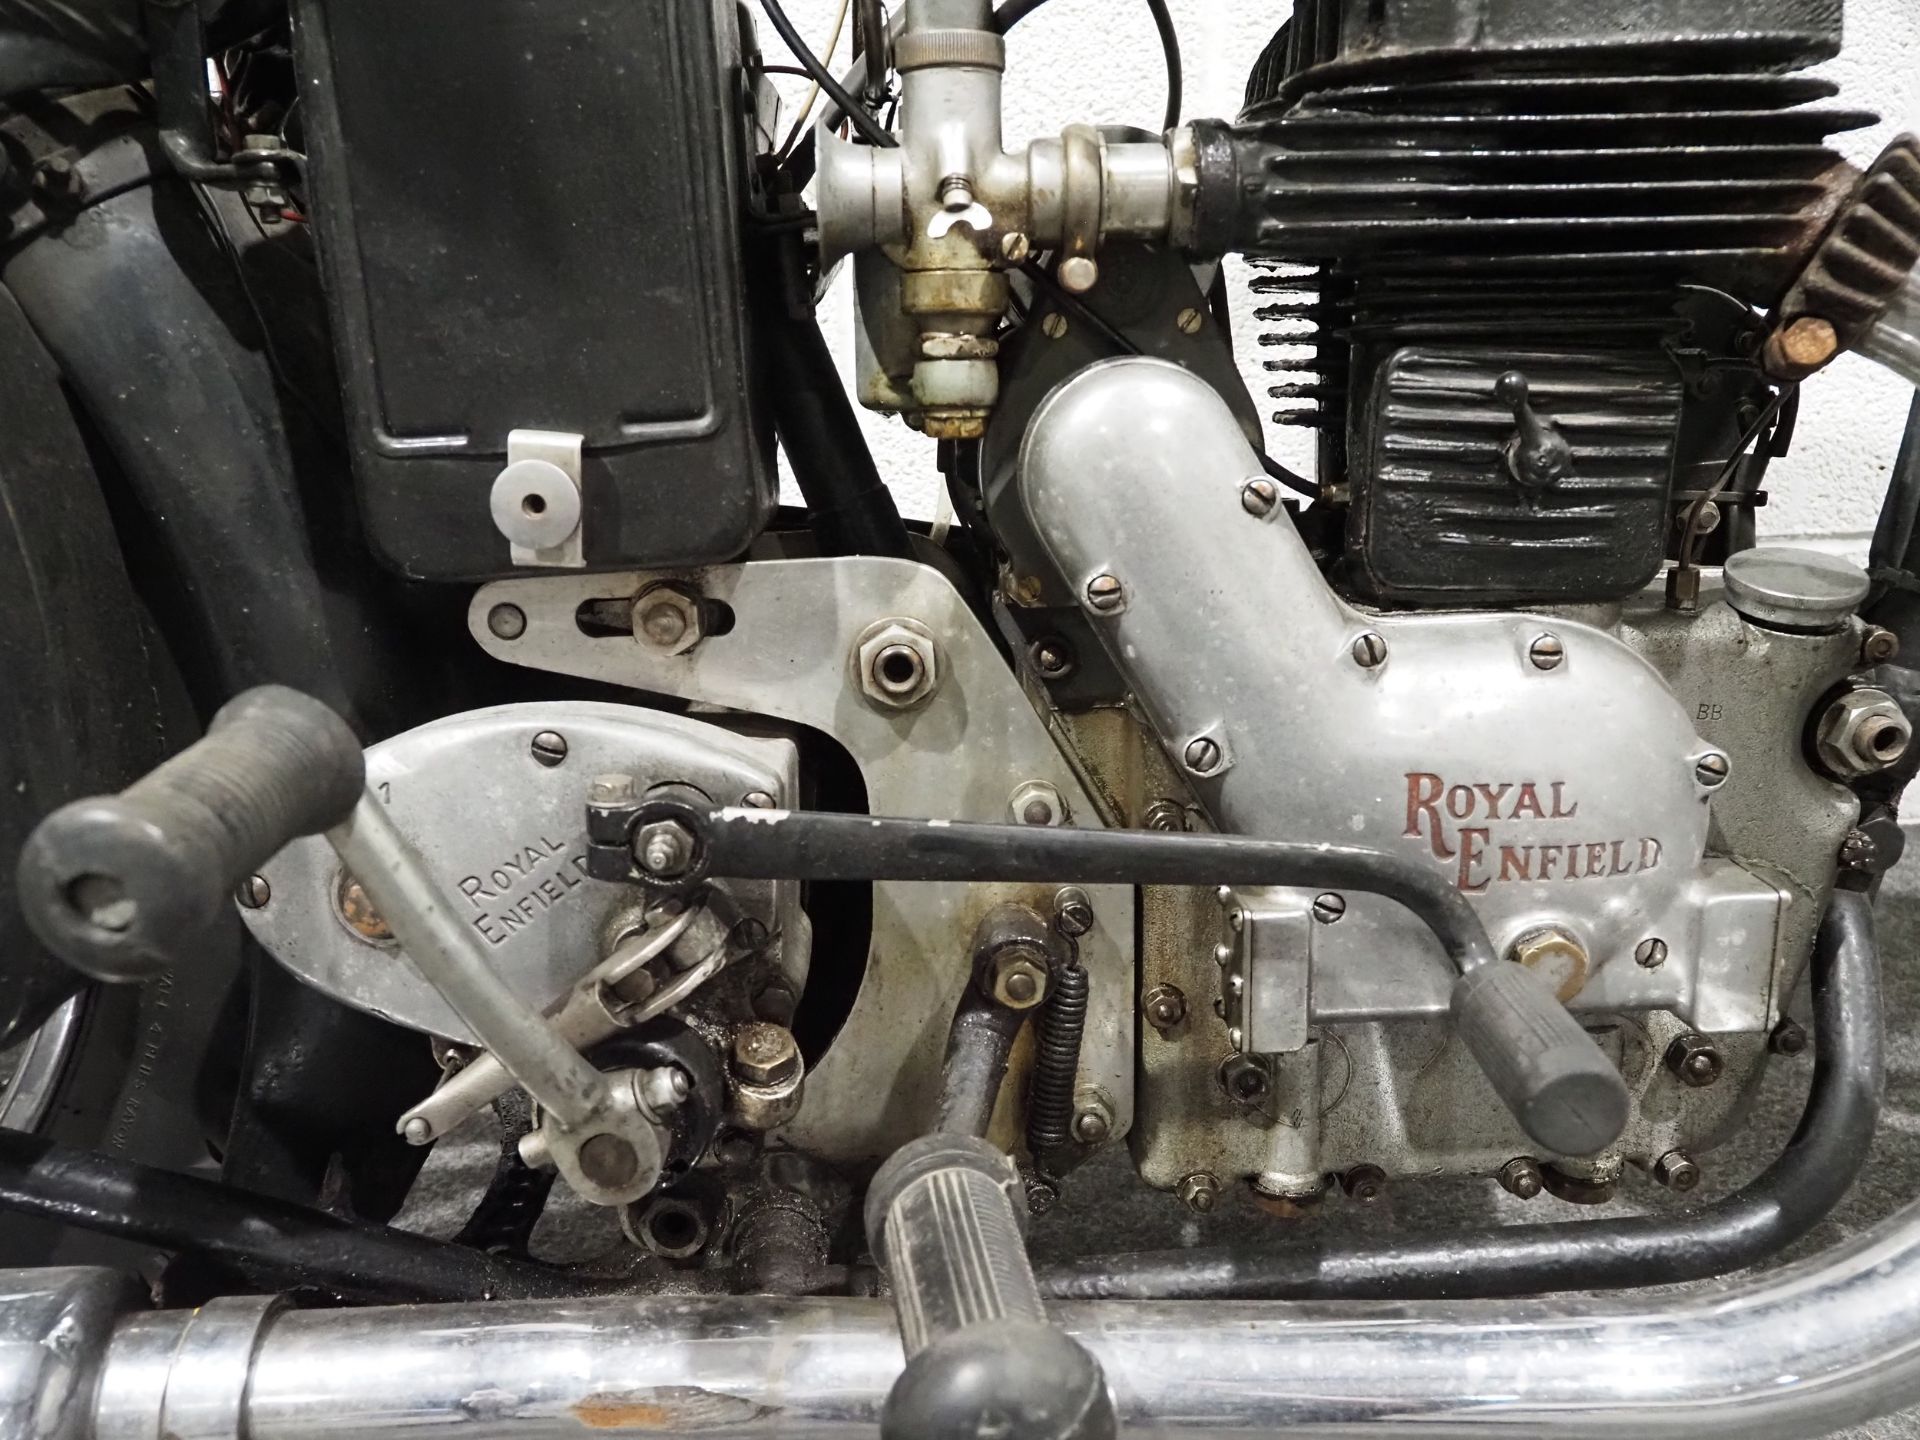 Royal Enfield CO exWD. 1939. 350cc Engine no. 19302 Starts and runs well, very good condition. - Image 5 of 6